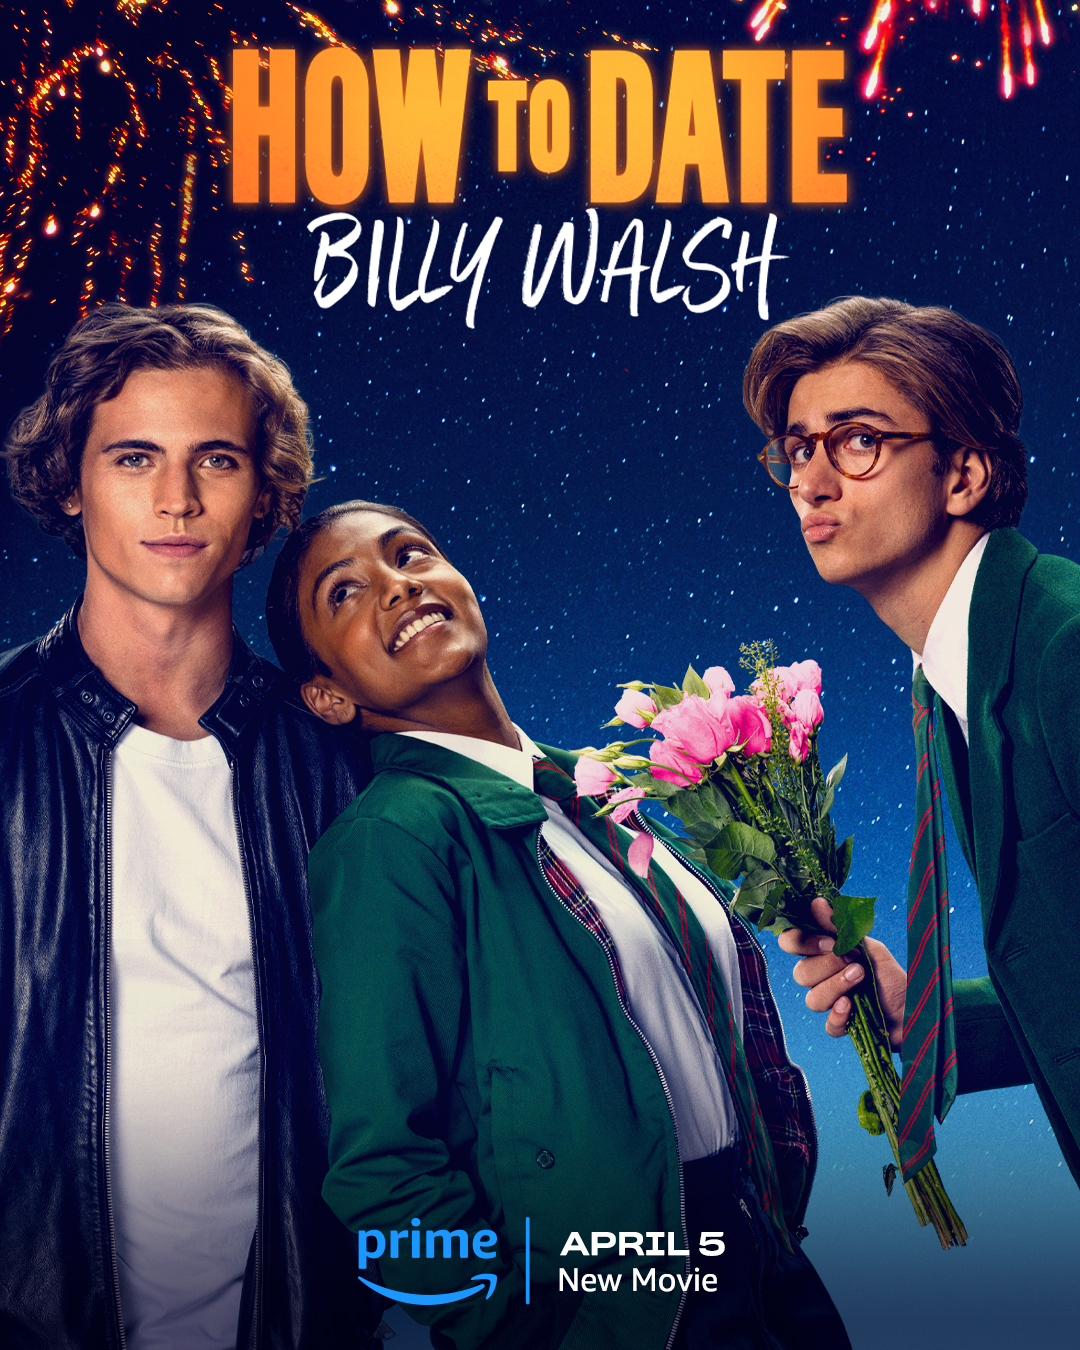 Three actors in character posing for &#x27;How to Date Billy Walsh&#x27; movie poster, one holding flowers. Release date mentioned